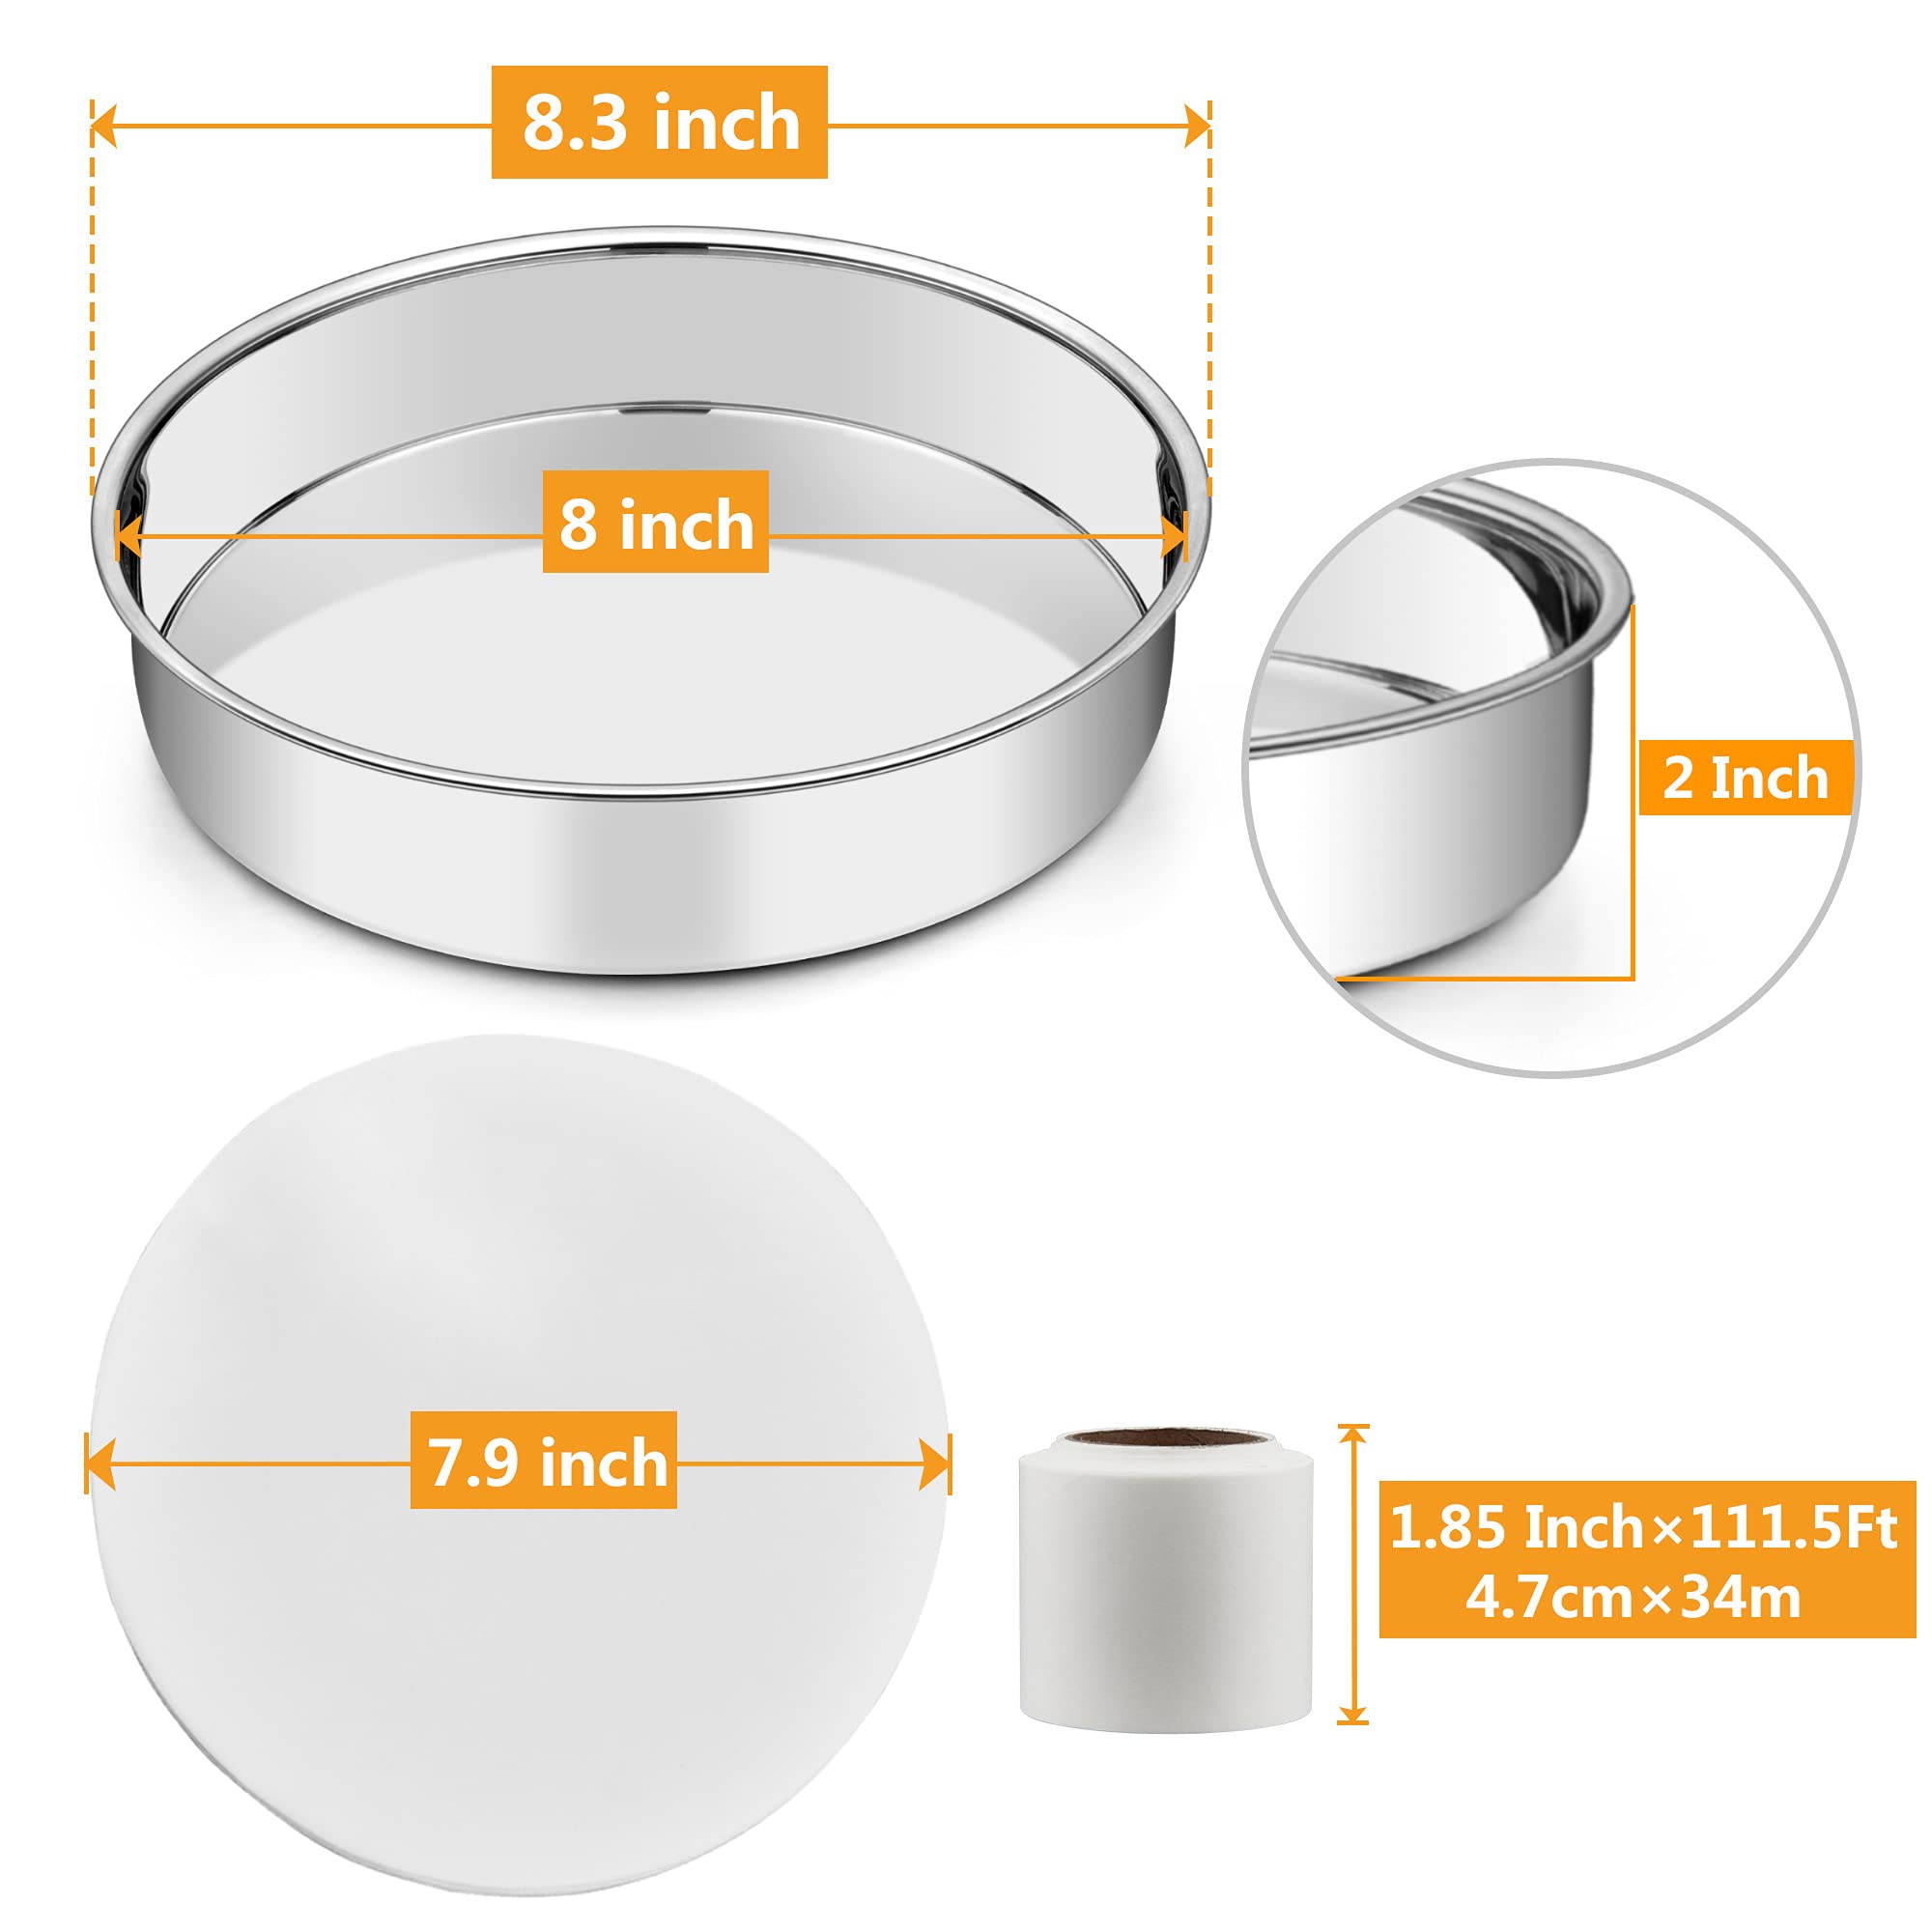 TeamFar 8 Inch Cake Pan Set of 3, Round Cake Pan Stainless Steel Round Baking Pan with 90 Pcs Round Parchment Papers & Parchment Paper Side Liner Roll(1.85 Inch × 111.5Ft), Healthy & Dishwasher Safe